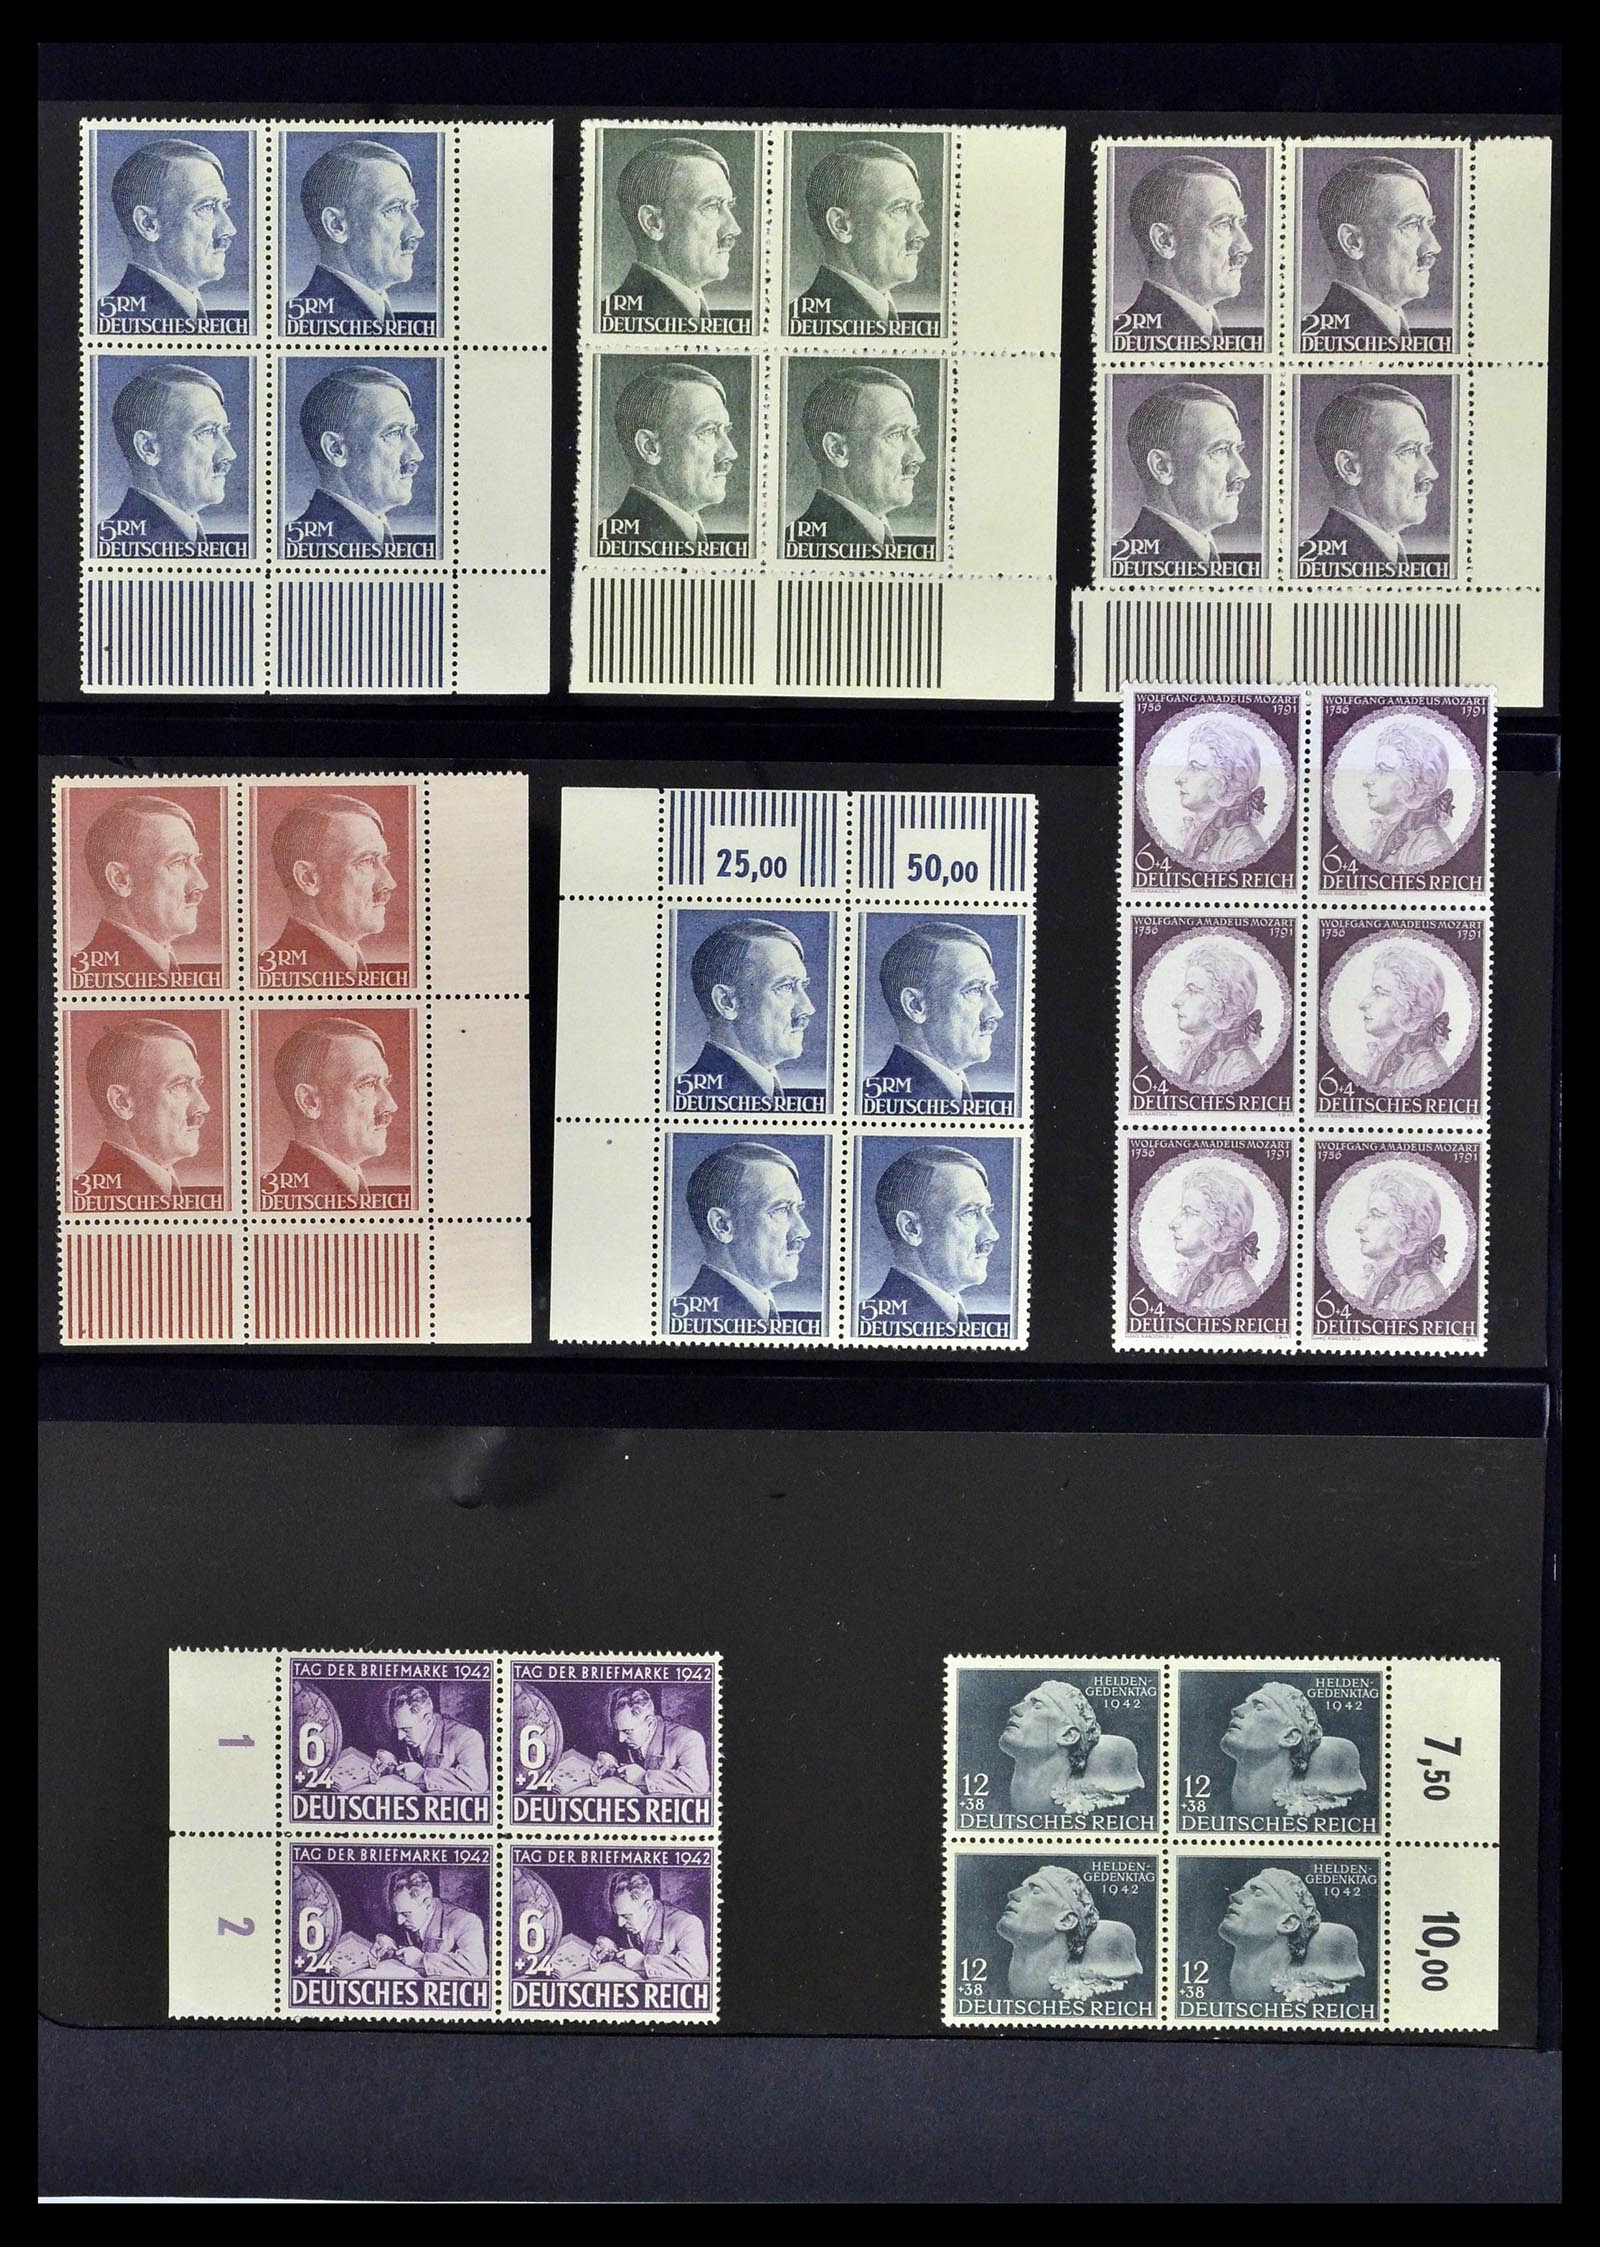 39255 0024 - Stamp collection 39255 German Reich MNH blocks of 4.